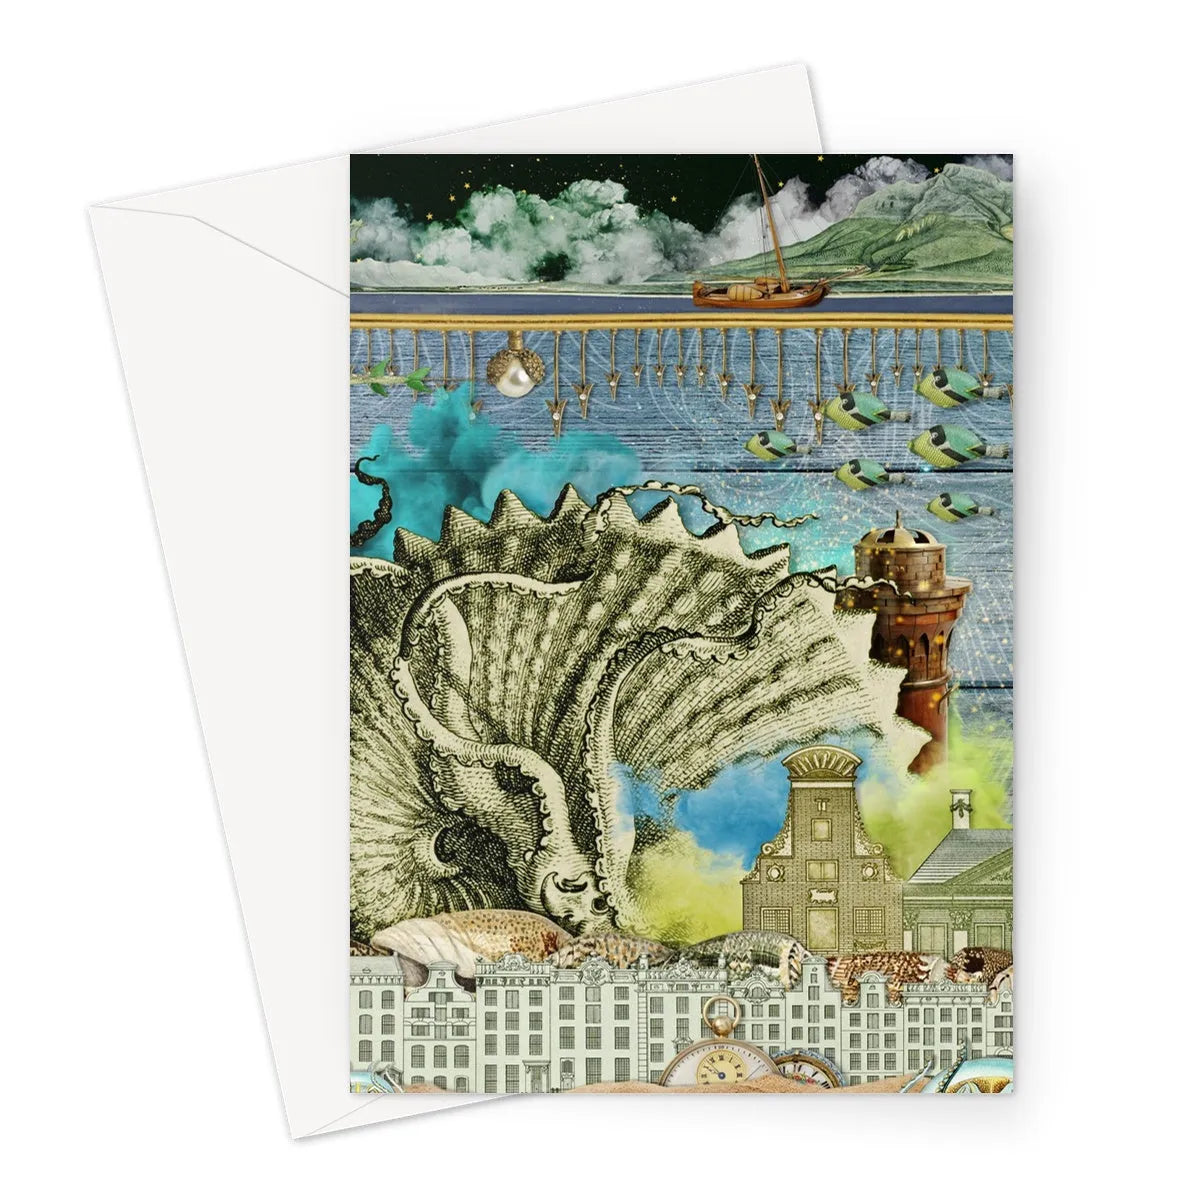 Down Where It’s Wetter Part 2 Greeting Card - A5 Portrait / 1 Card - Greeting & Note Cards - Aesthetic Art